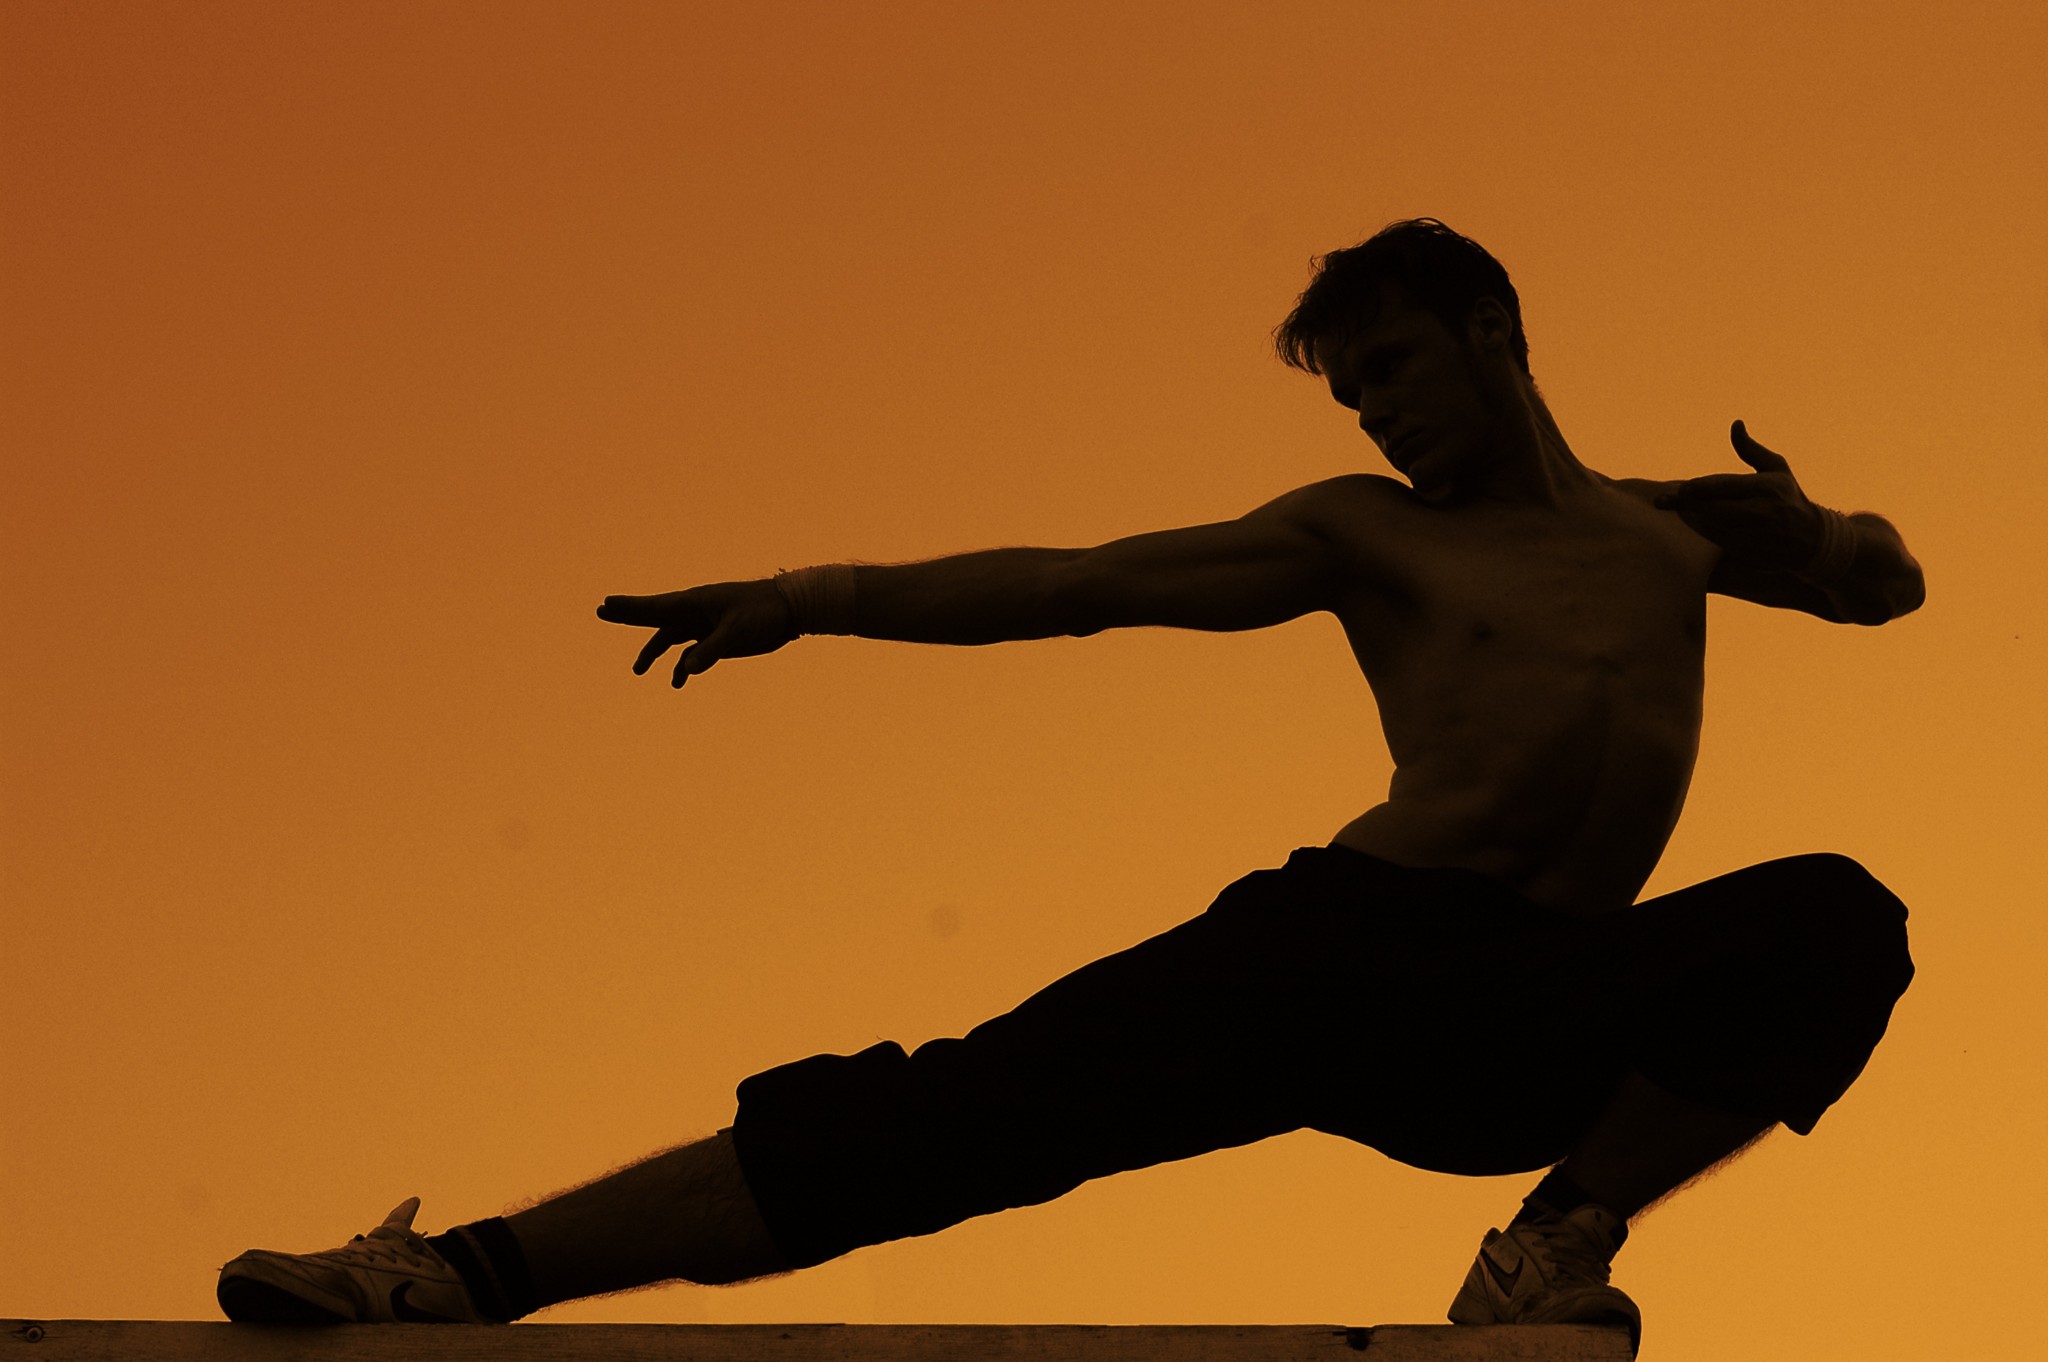 7 Martial Arts Concepts to Apply in Your Life